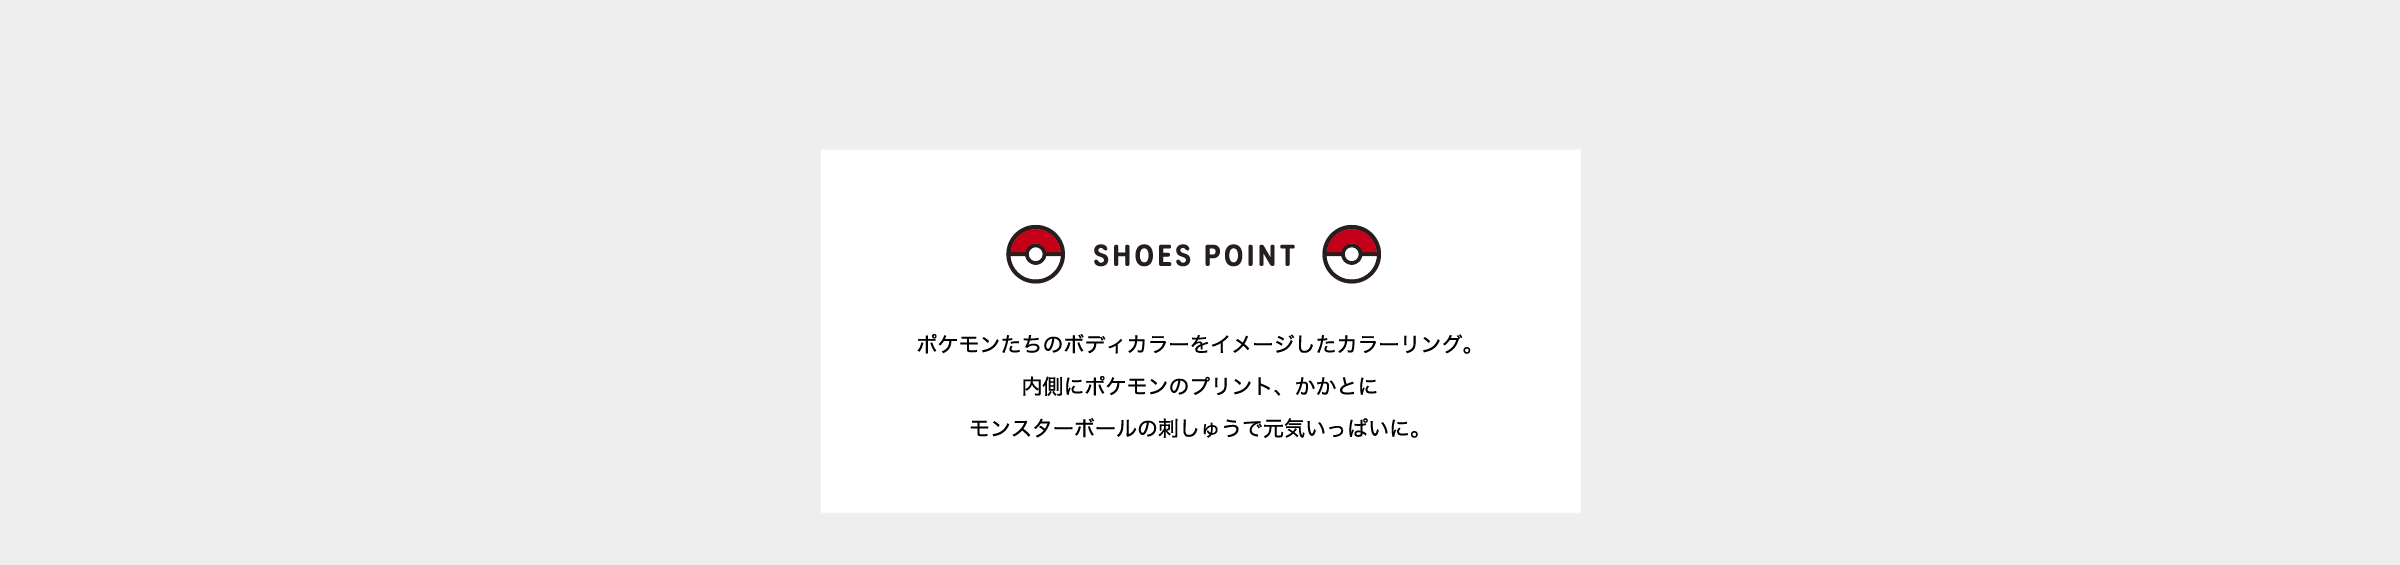 SHOES POINT